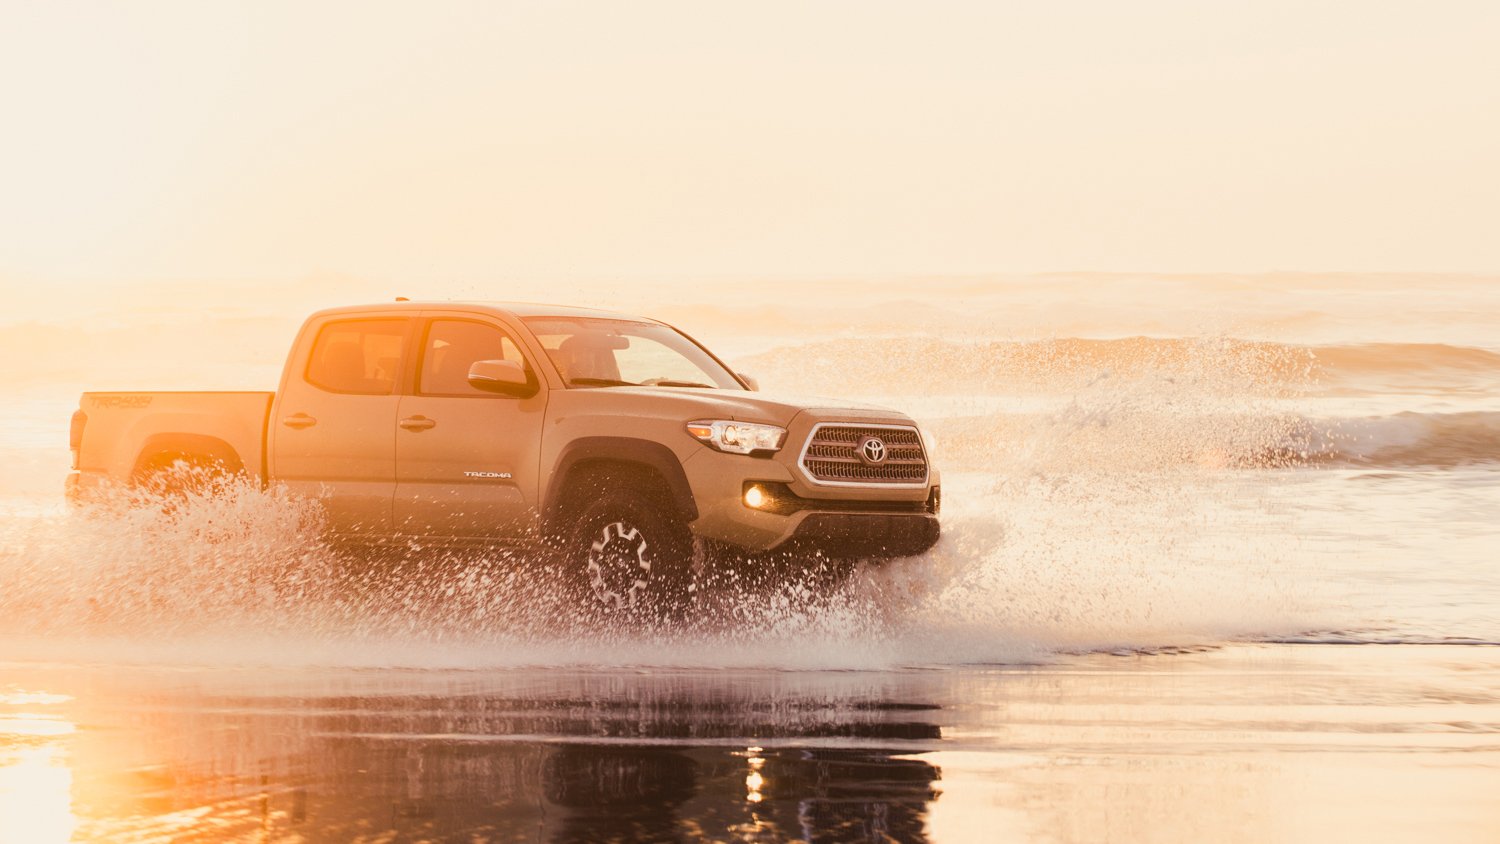 The Toyota Tacoma driving through the shallows of the ocean, photo by Mark Skovorodko.